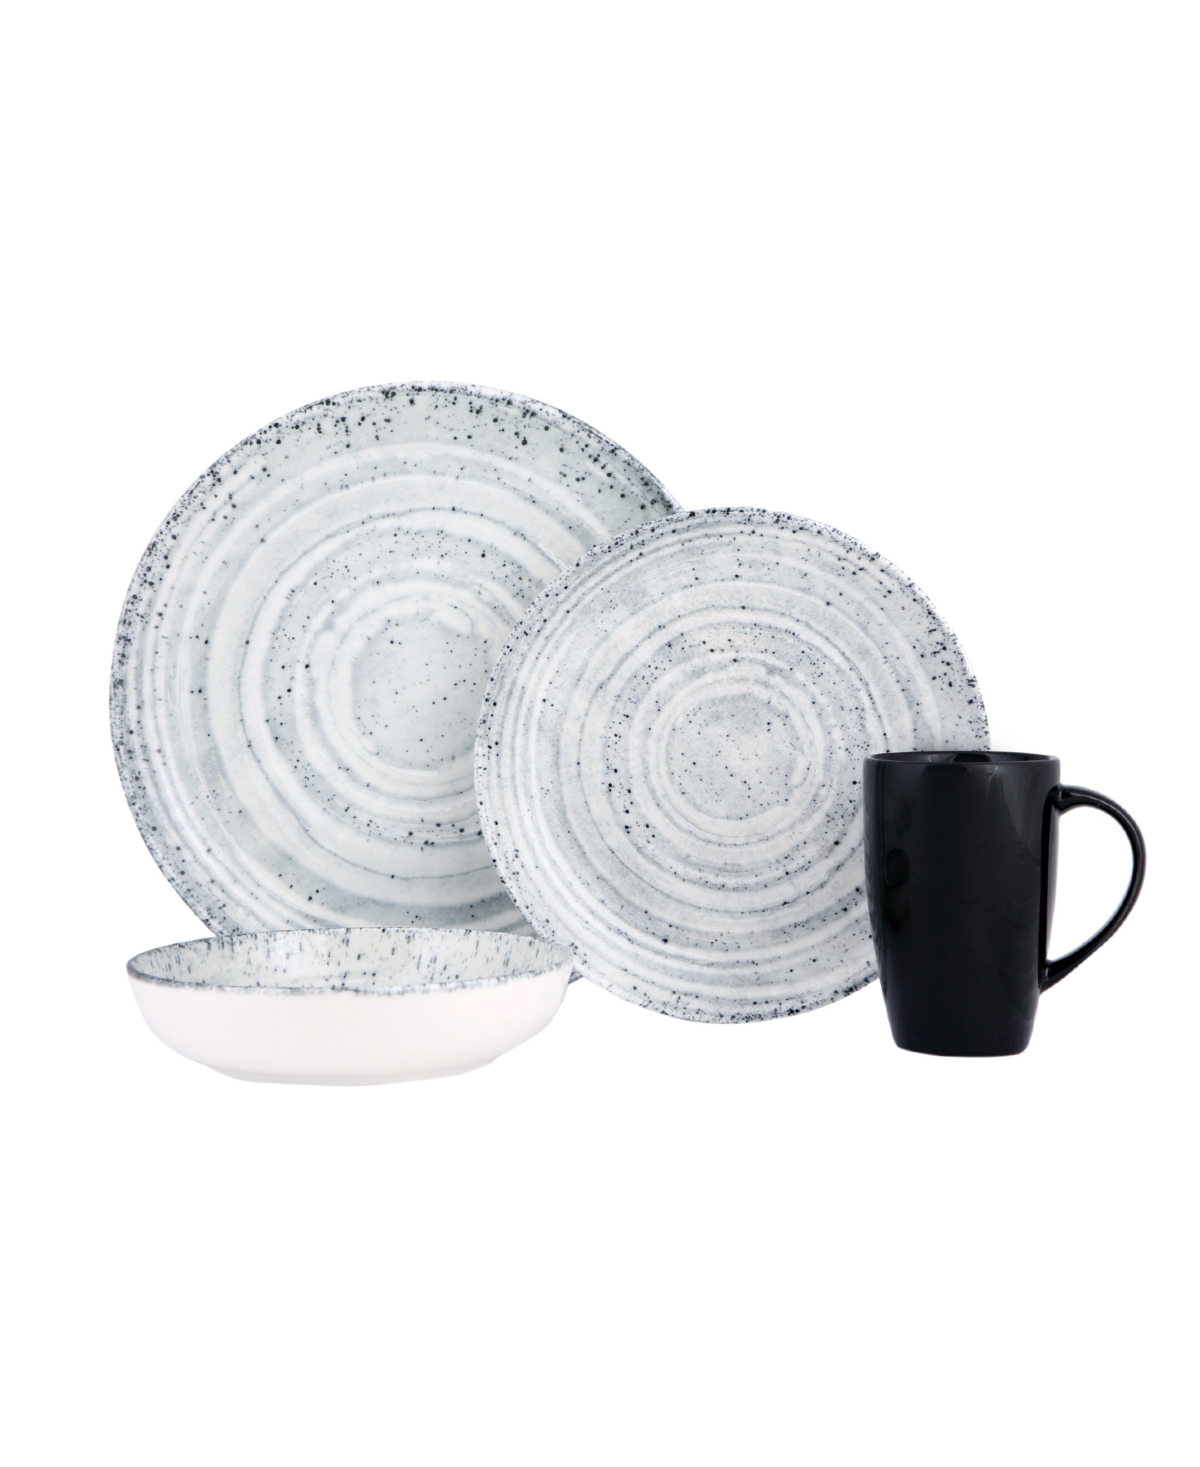 New Age Natura 4-Piece Place Setting Set - Gray and White